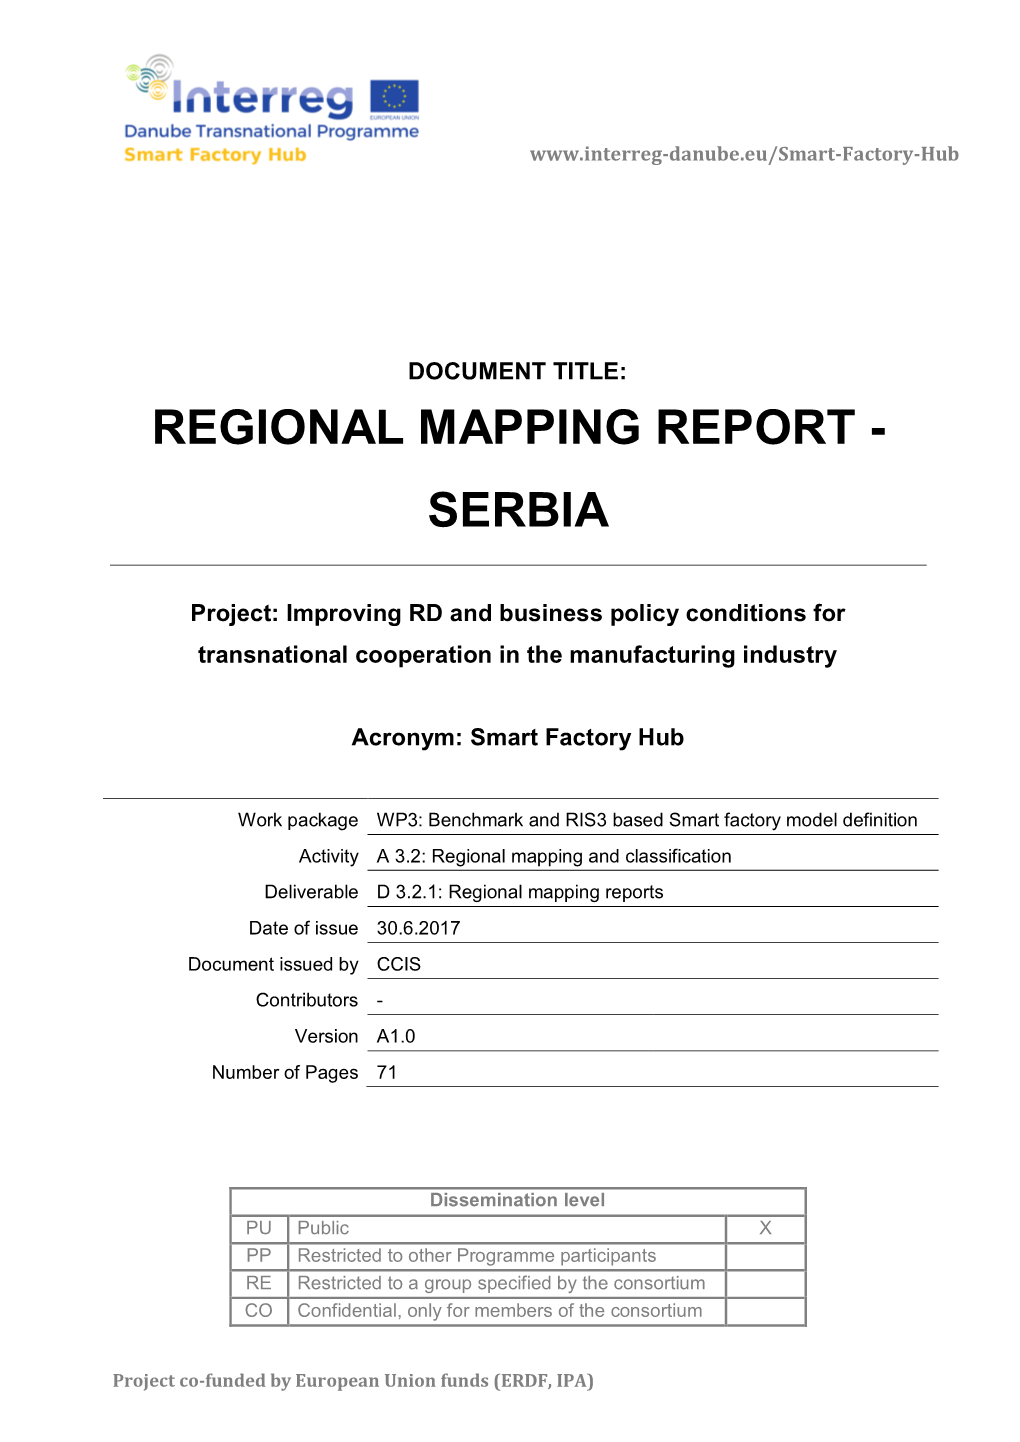 Regional Mapping Report - Serbia